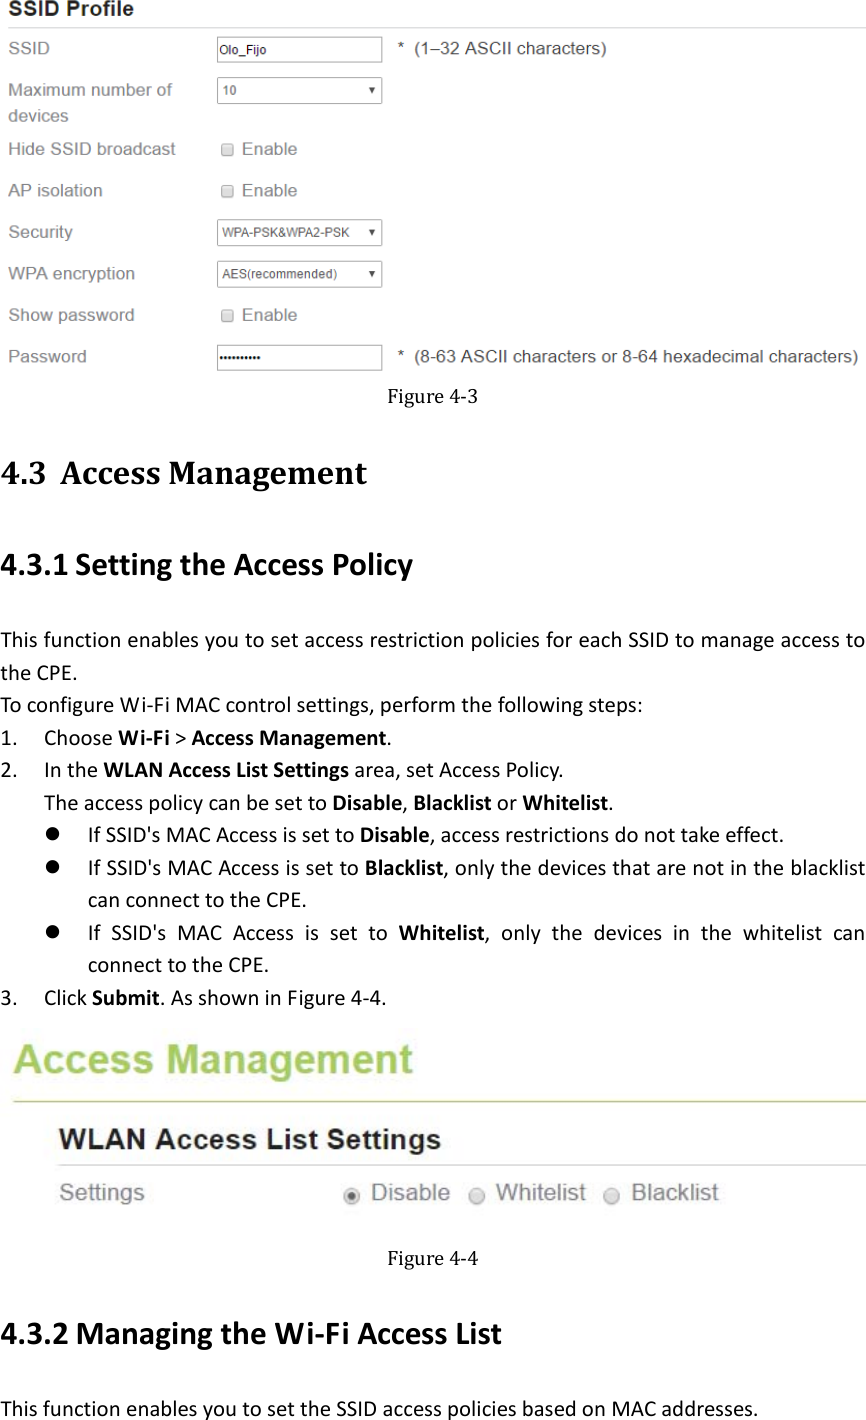   Figure4‐34.3 AccessManagement4.3.1 SettingtheAccessPolicyThisfunctionenablesyoutosetaccessrestrictionpoliciesforeachSSIDtomanageaccesstotheCPE.ToconfigureWi‐FiMACcontrolsettings,performthefollowingsteps:1. ChooseWi‐Fi&gt;AccessManagement.2. IntheWLANAccessListSettingsarea,setAccessPolicy.TheaccesspolicycanbesettoDisable,BlacklistorWhitelist. IfSSID&apos;sMACAccessissettoDisable,accessrestrictionsdonottakeeffect. IfSSID&apos;sMACAccessissettoBlacklist,onlythedevicesthatarenotintheblacklistcanconnecttotheCPE. IfSSID&apos;sMACAccessissettoWhitelist,onlythedevicesinthewhitelistcanconnecttotheCPE.3. ClickSubmit.AsshowninFigure4‐4.Figure4‐44.3.2 ManagingtheWi‐FiAccessListThisfunctionenablesyoutosettheSSIDaccesspoliciesbasedonMACaddresses.